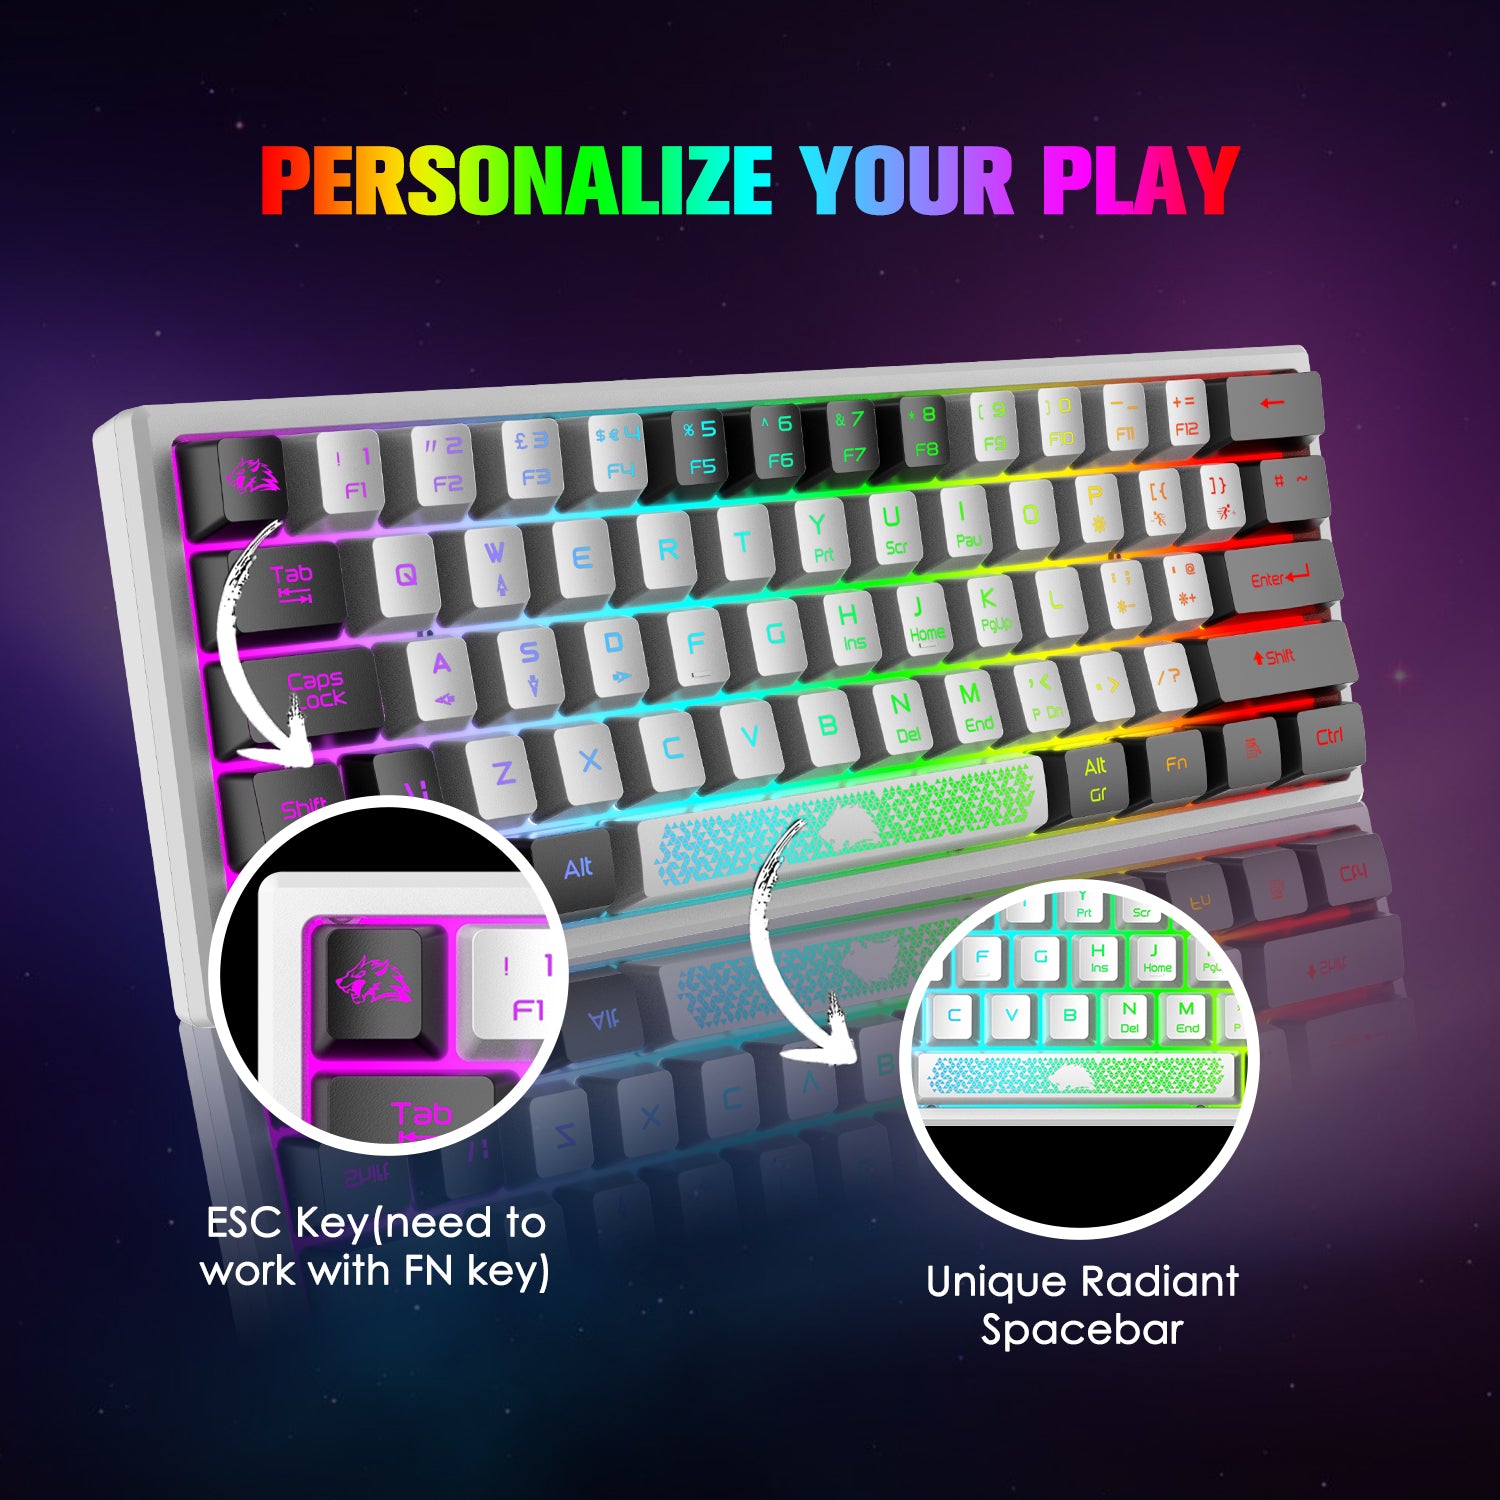 UK Layout 60% Percent Mechanical Gaming Keyboard RGB Backlight USB C for  PC, PS4